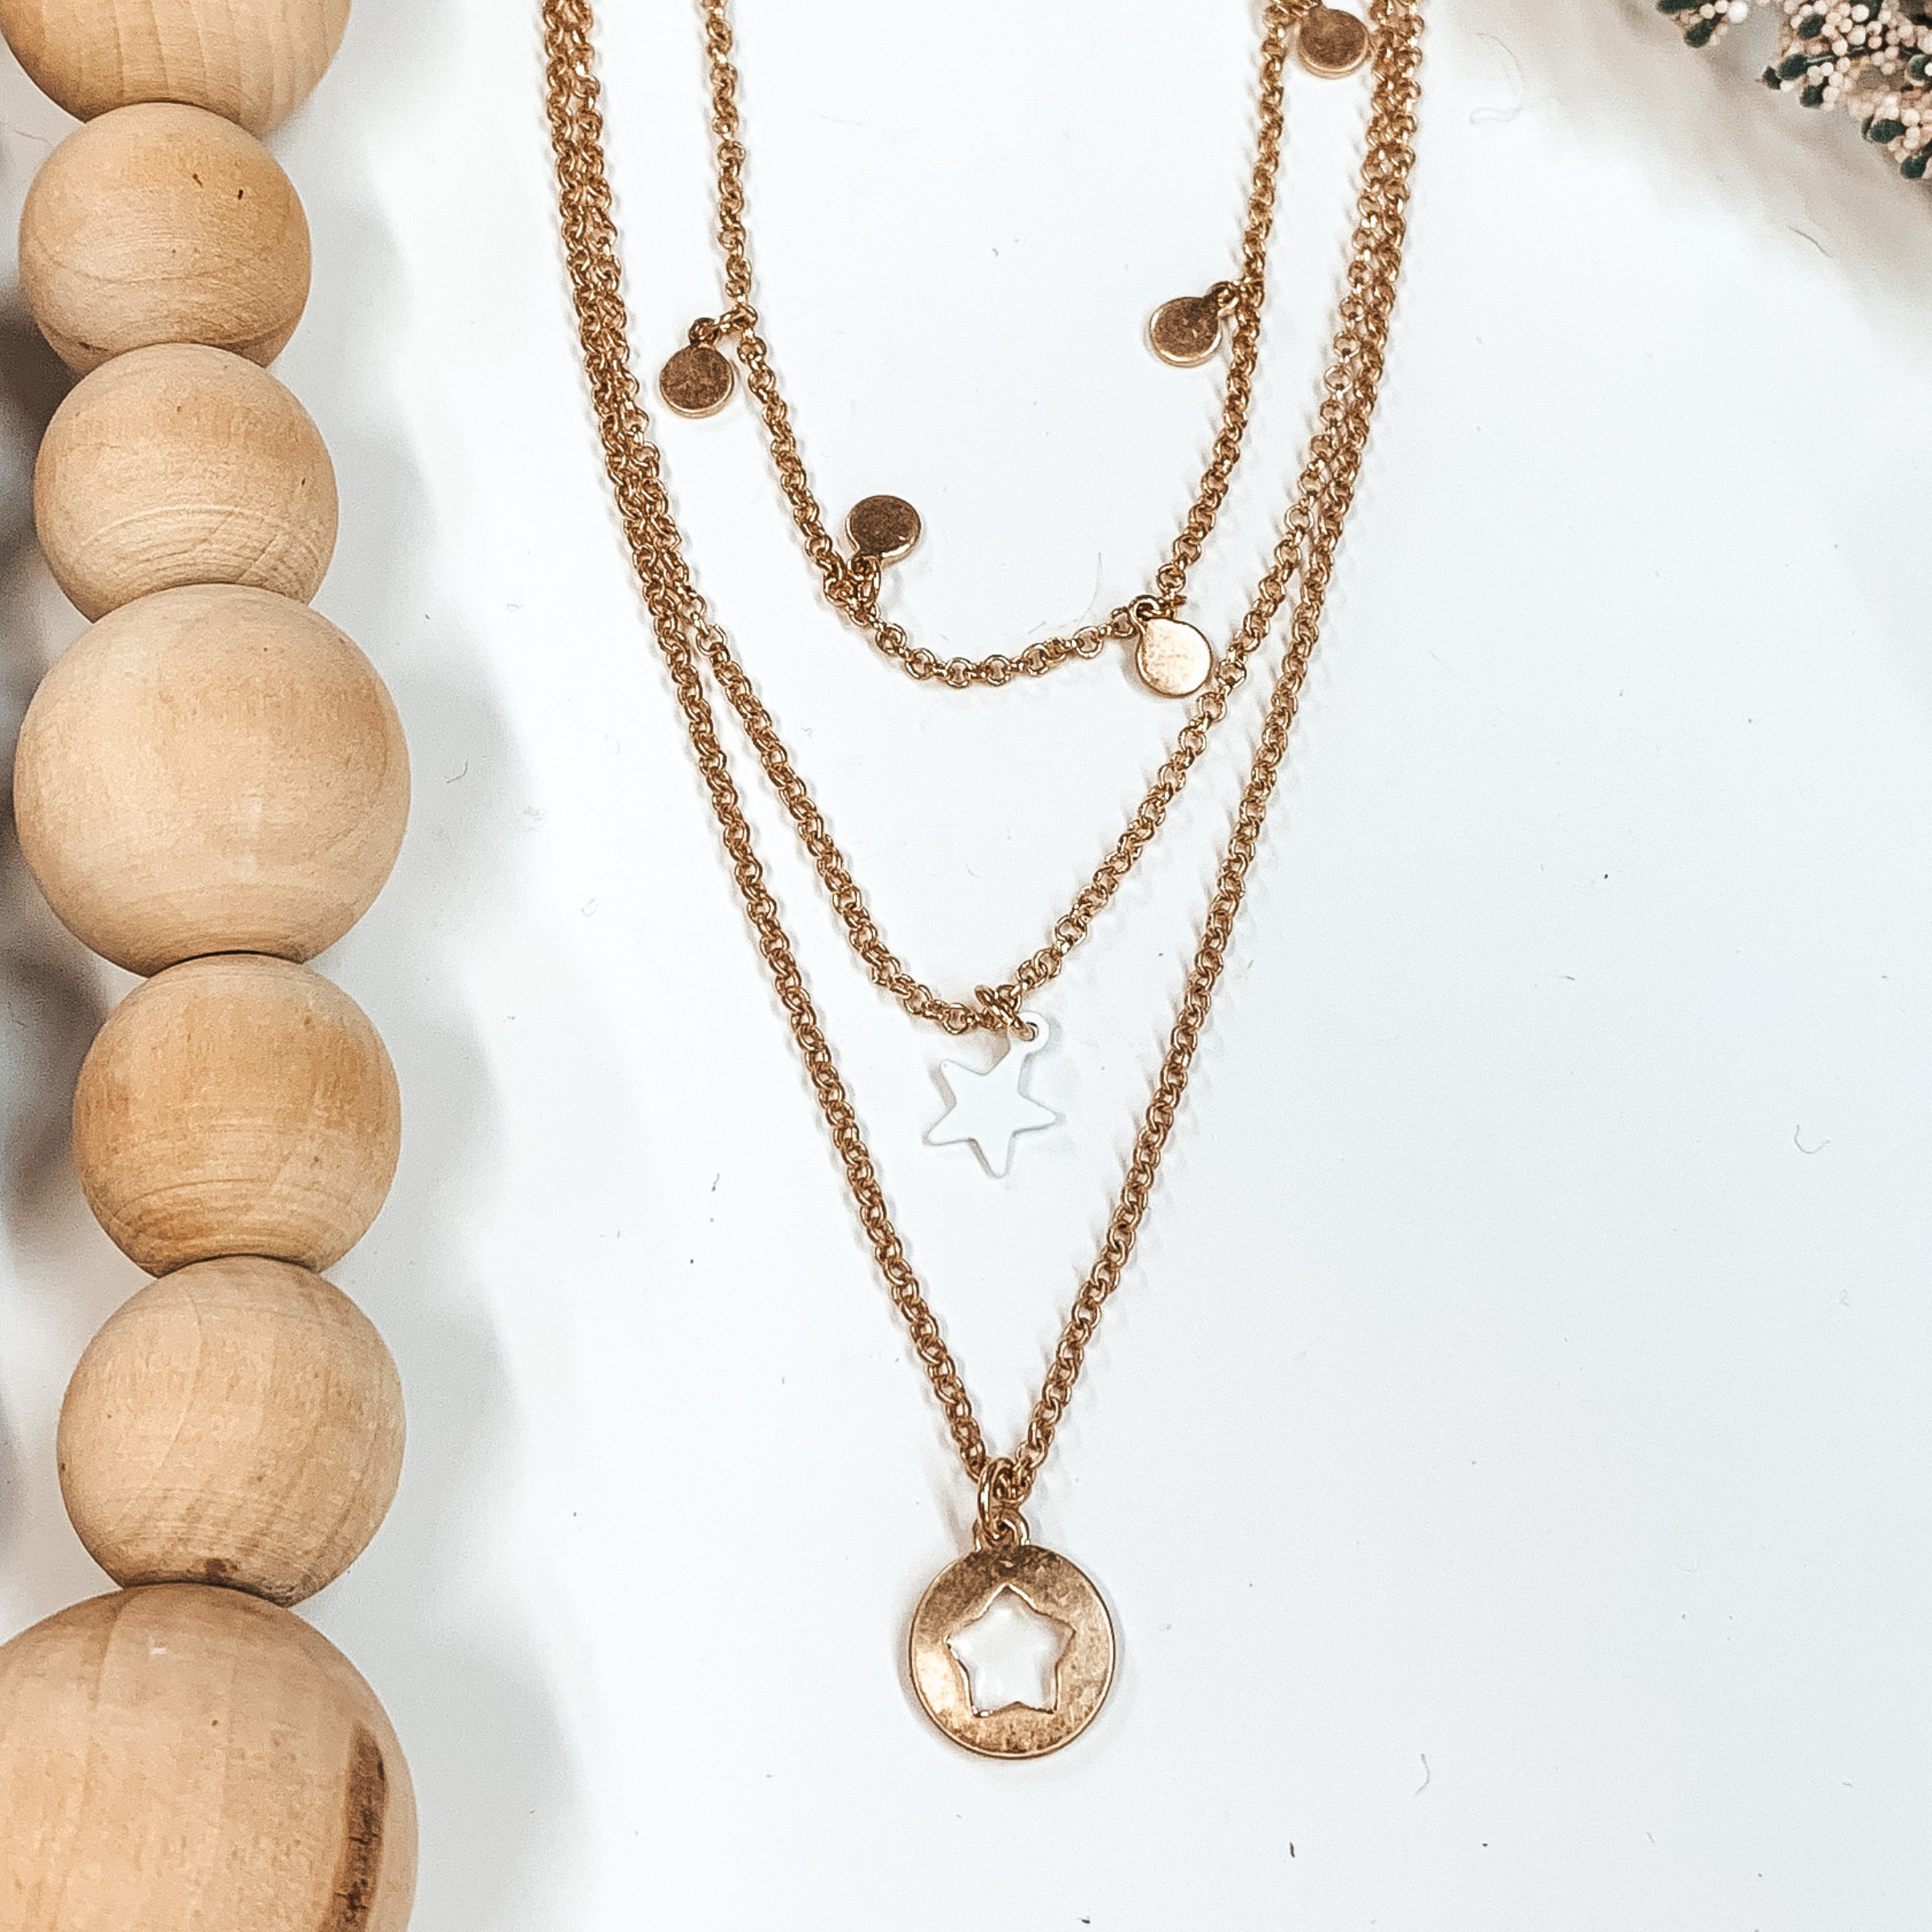 First Star Necklace Set in Gold/White - Giddy Up Glamour Boutique